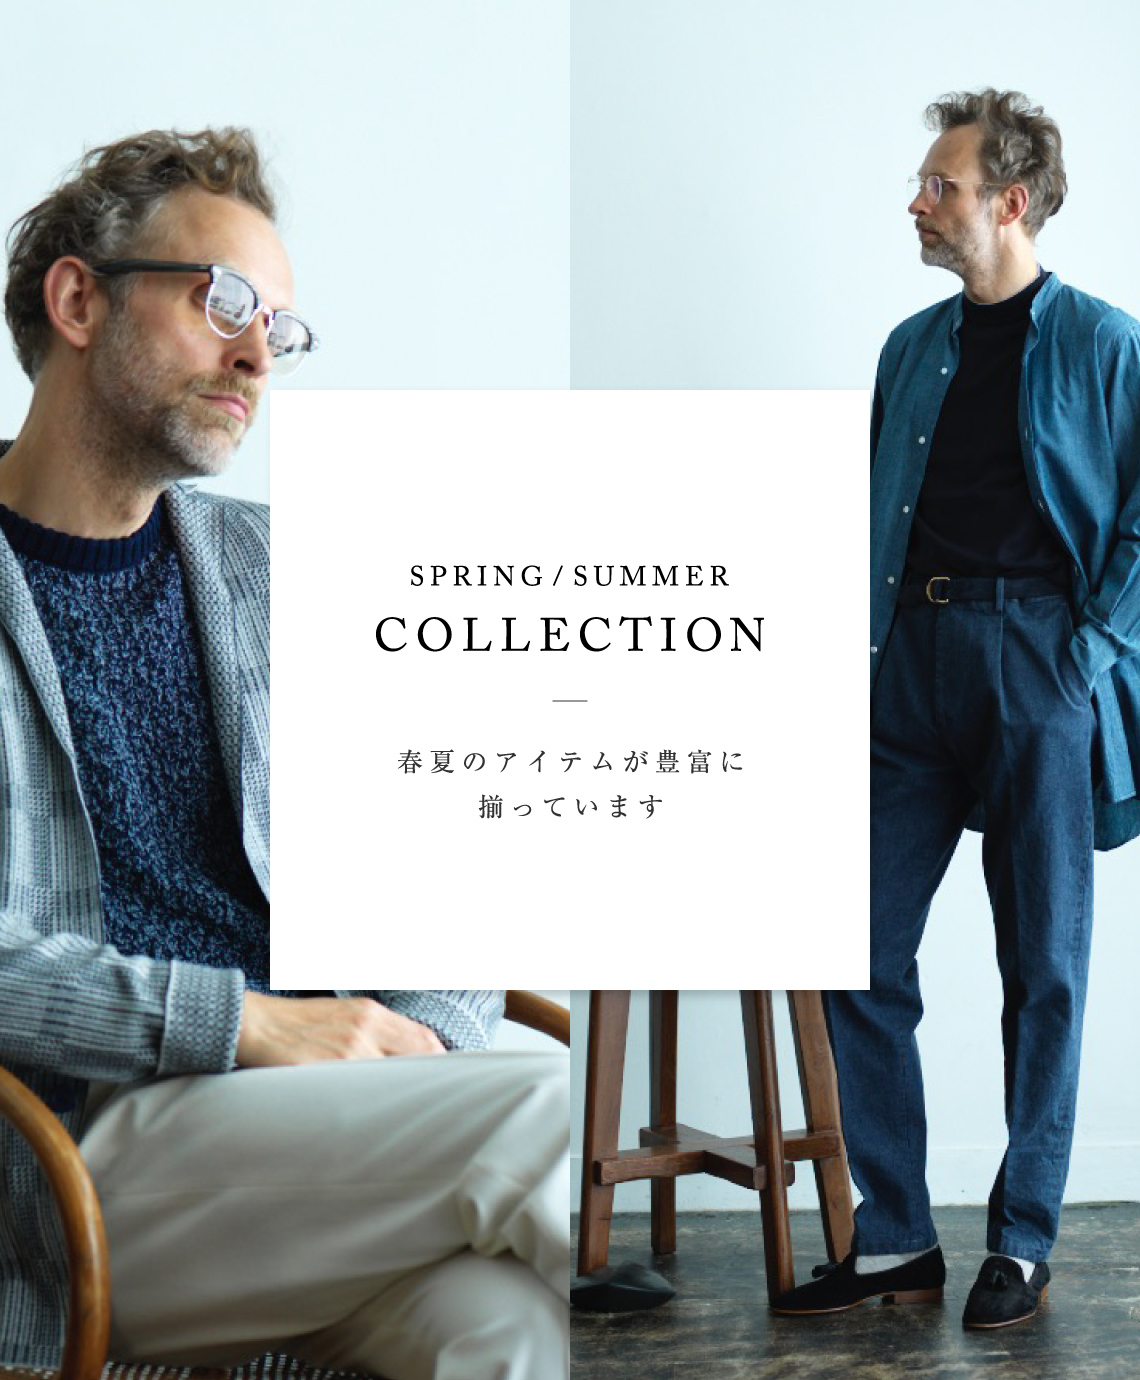 SPRING / SUMMER COLLECTION